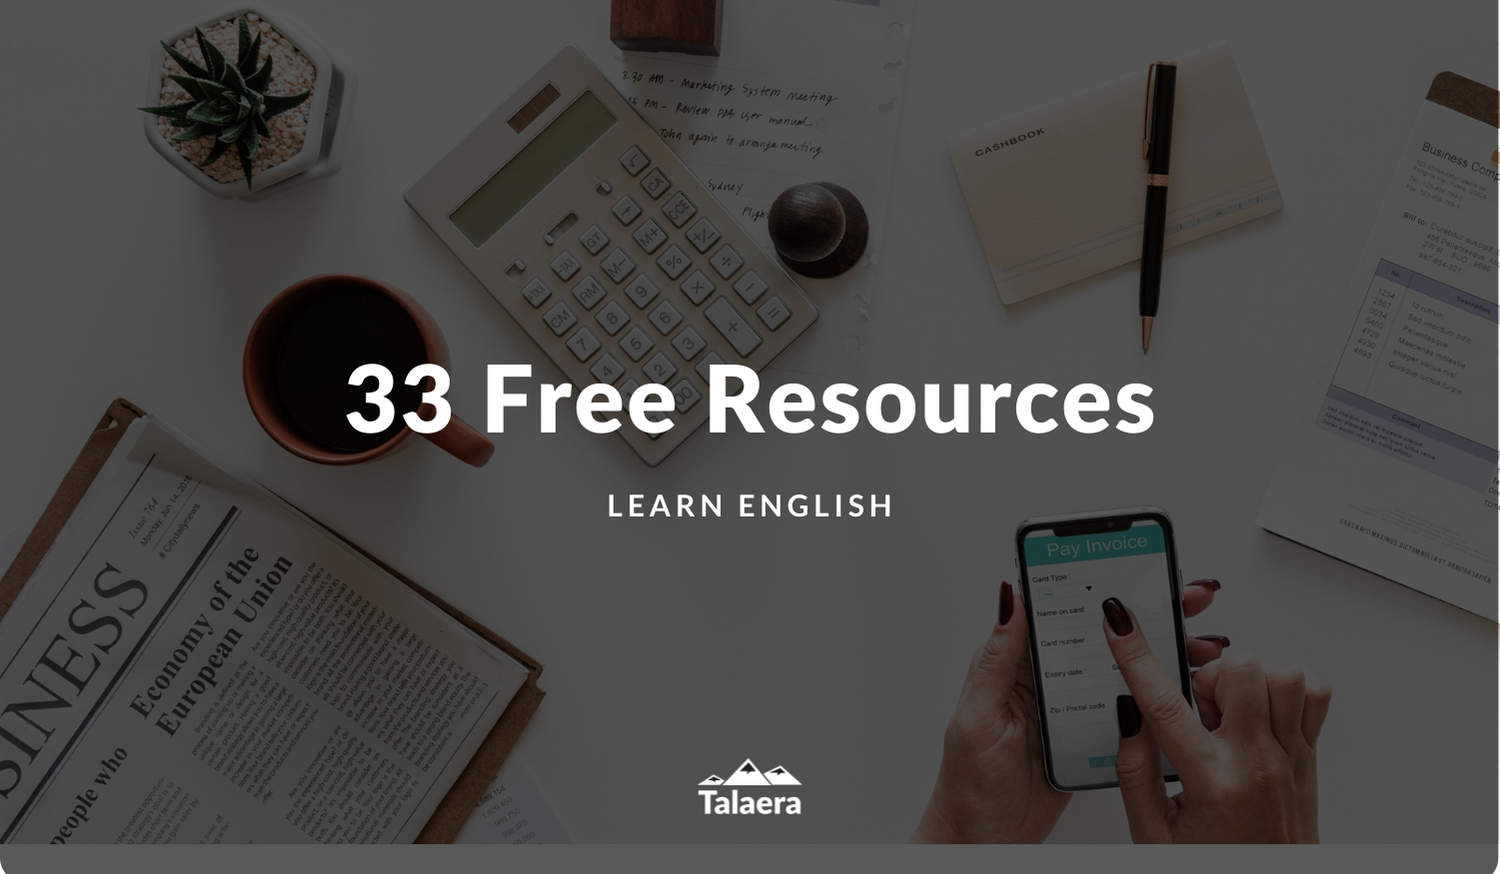 33 Free Resources to Learn English - Talaera